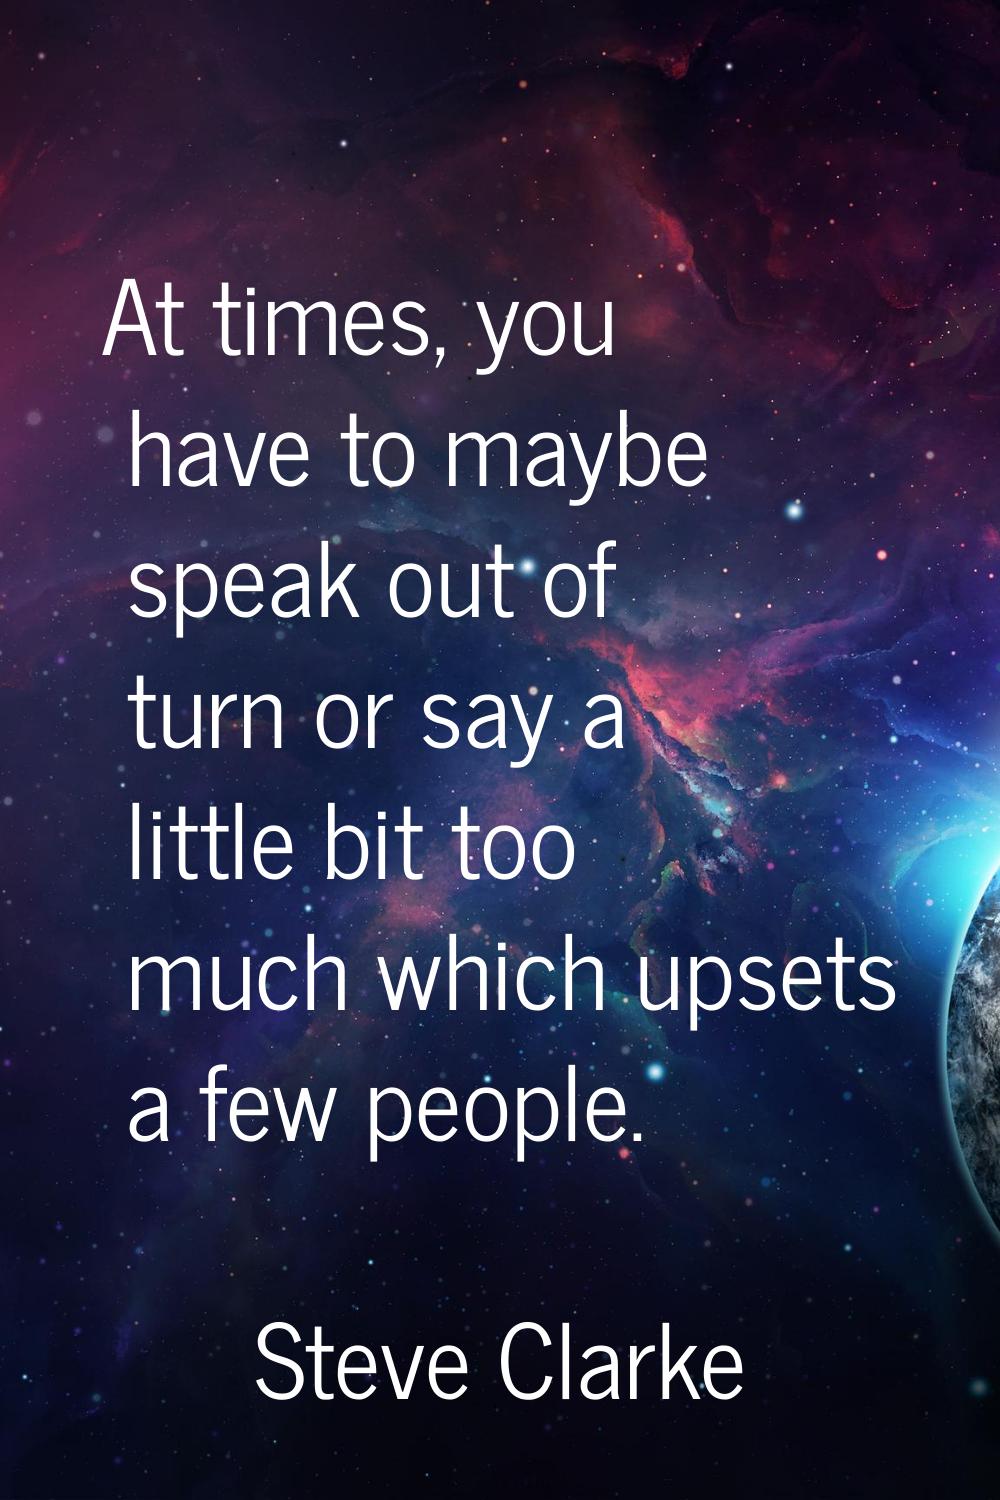 At times, you have to maybe speak out of turn or say a little bit too much which upsets a few peopl